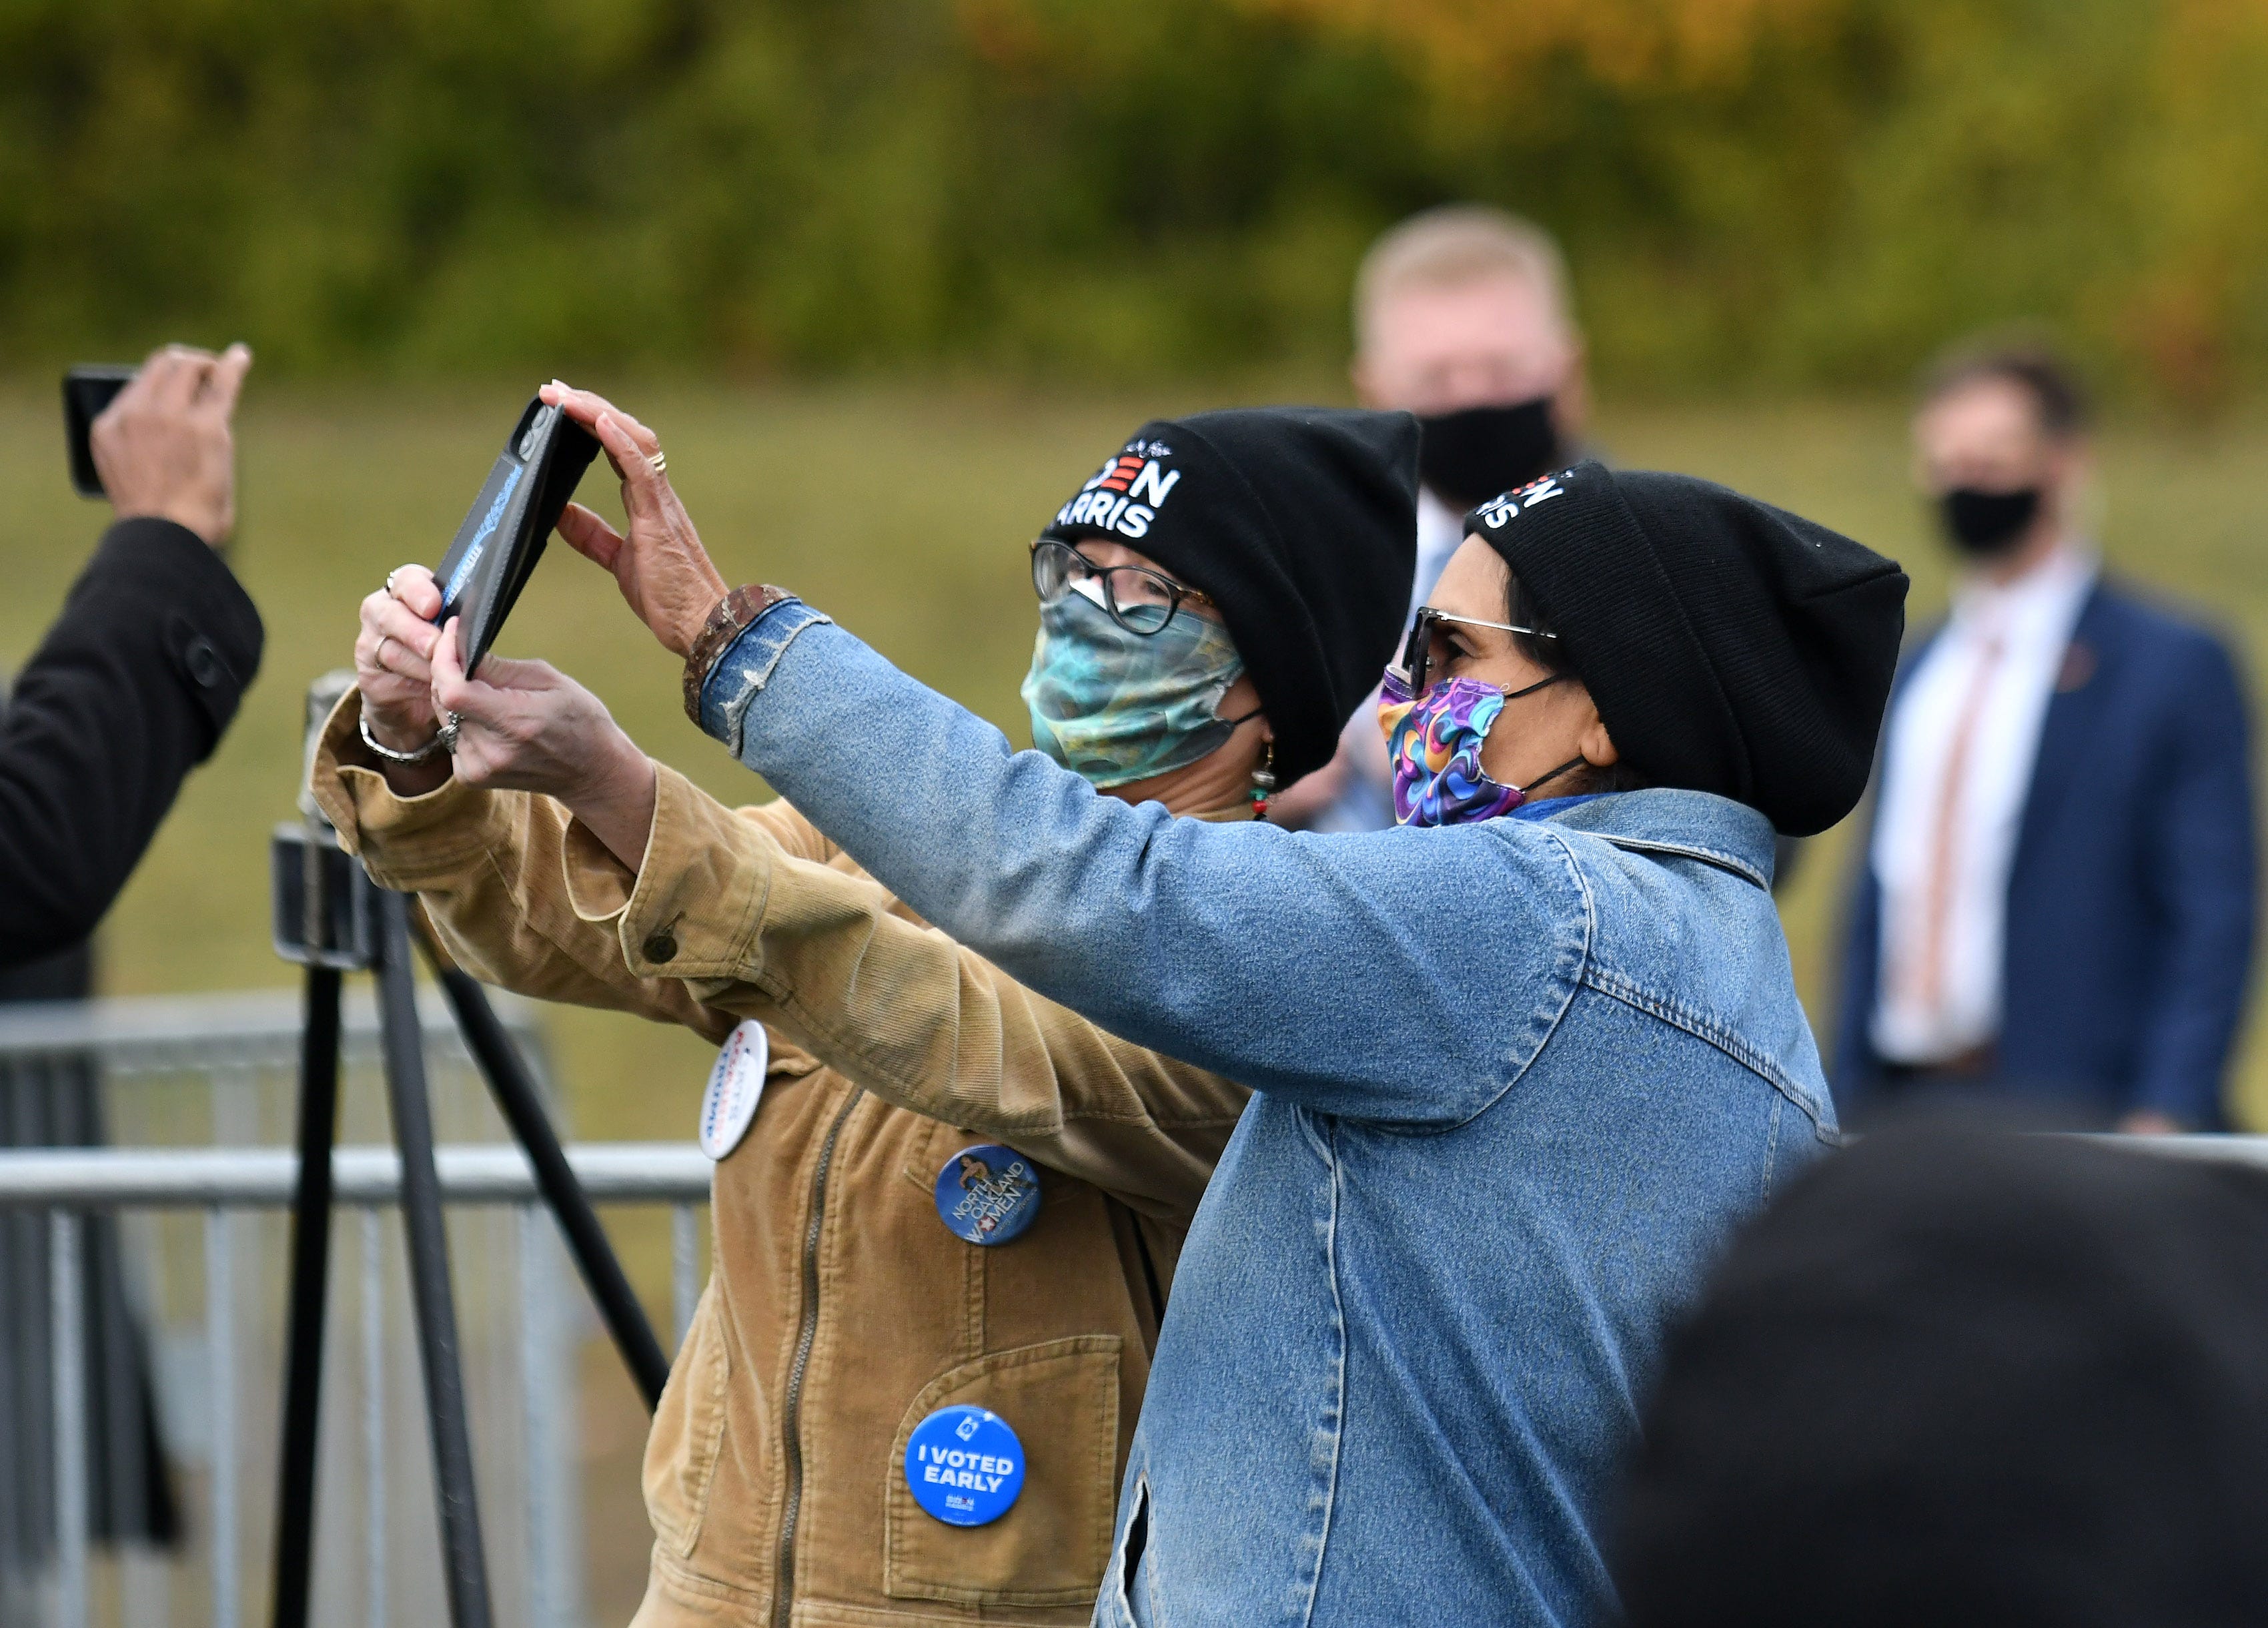 Two Biden Harris supporters take a selfie as Democratic vice presidential candidate Sen. Kamala Harris speaks at the Canvass Kickoff event at the Troy Community Center in Troy, Mich. in Detroit on Oct. 25, 2020.